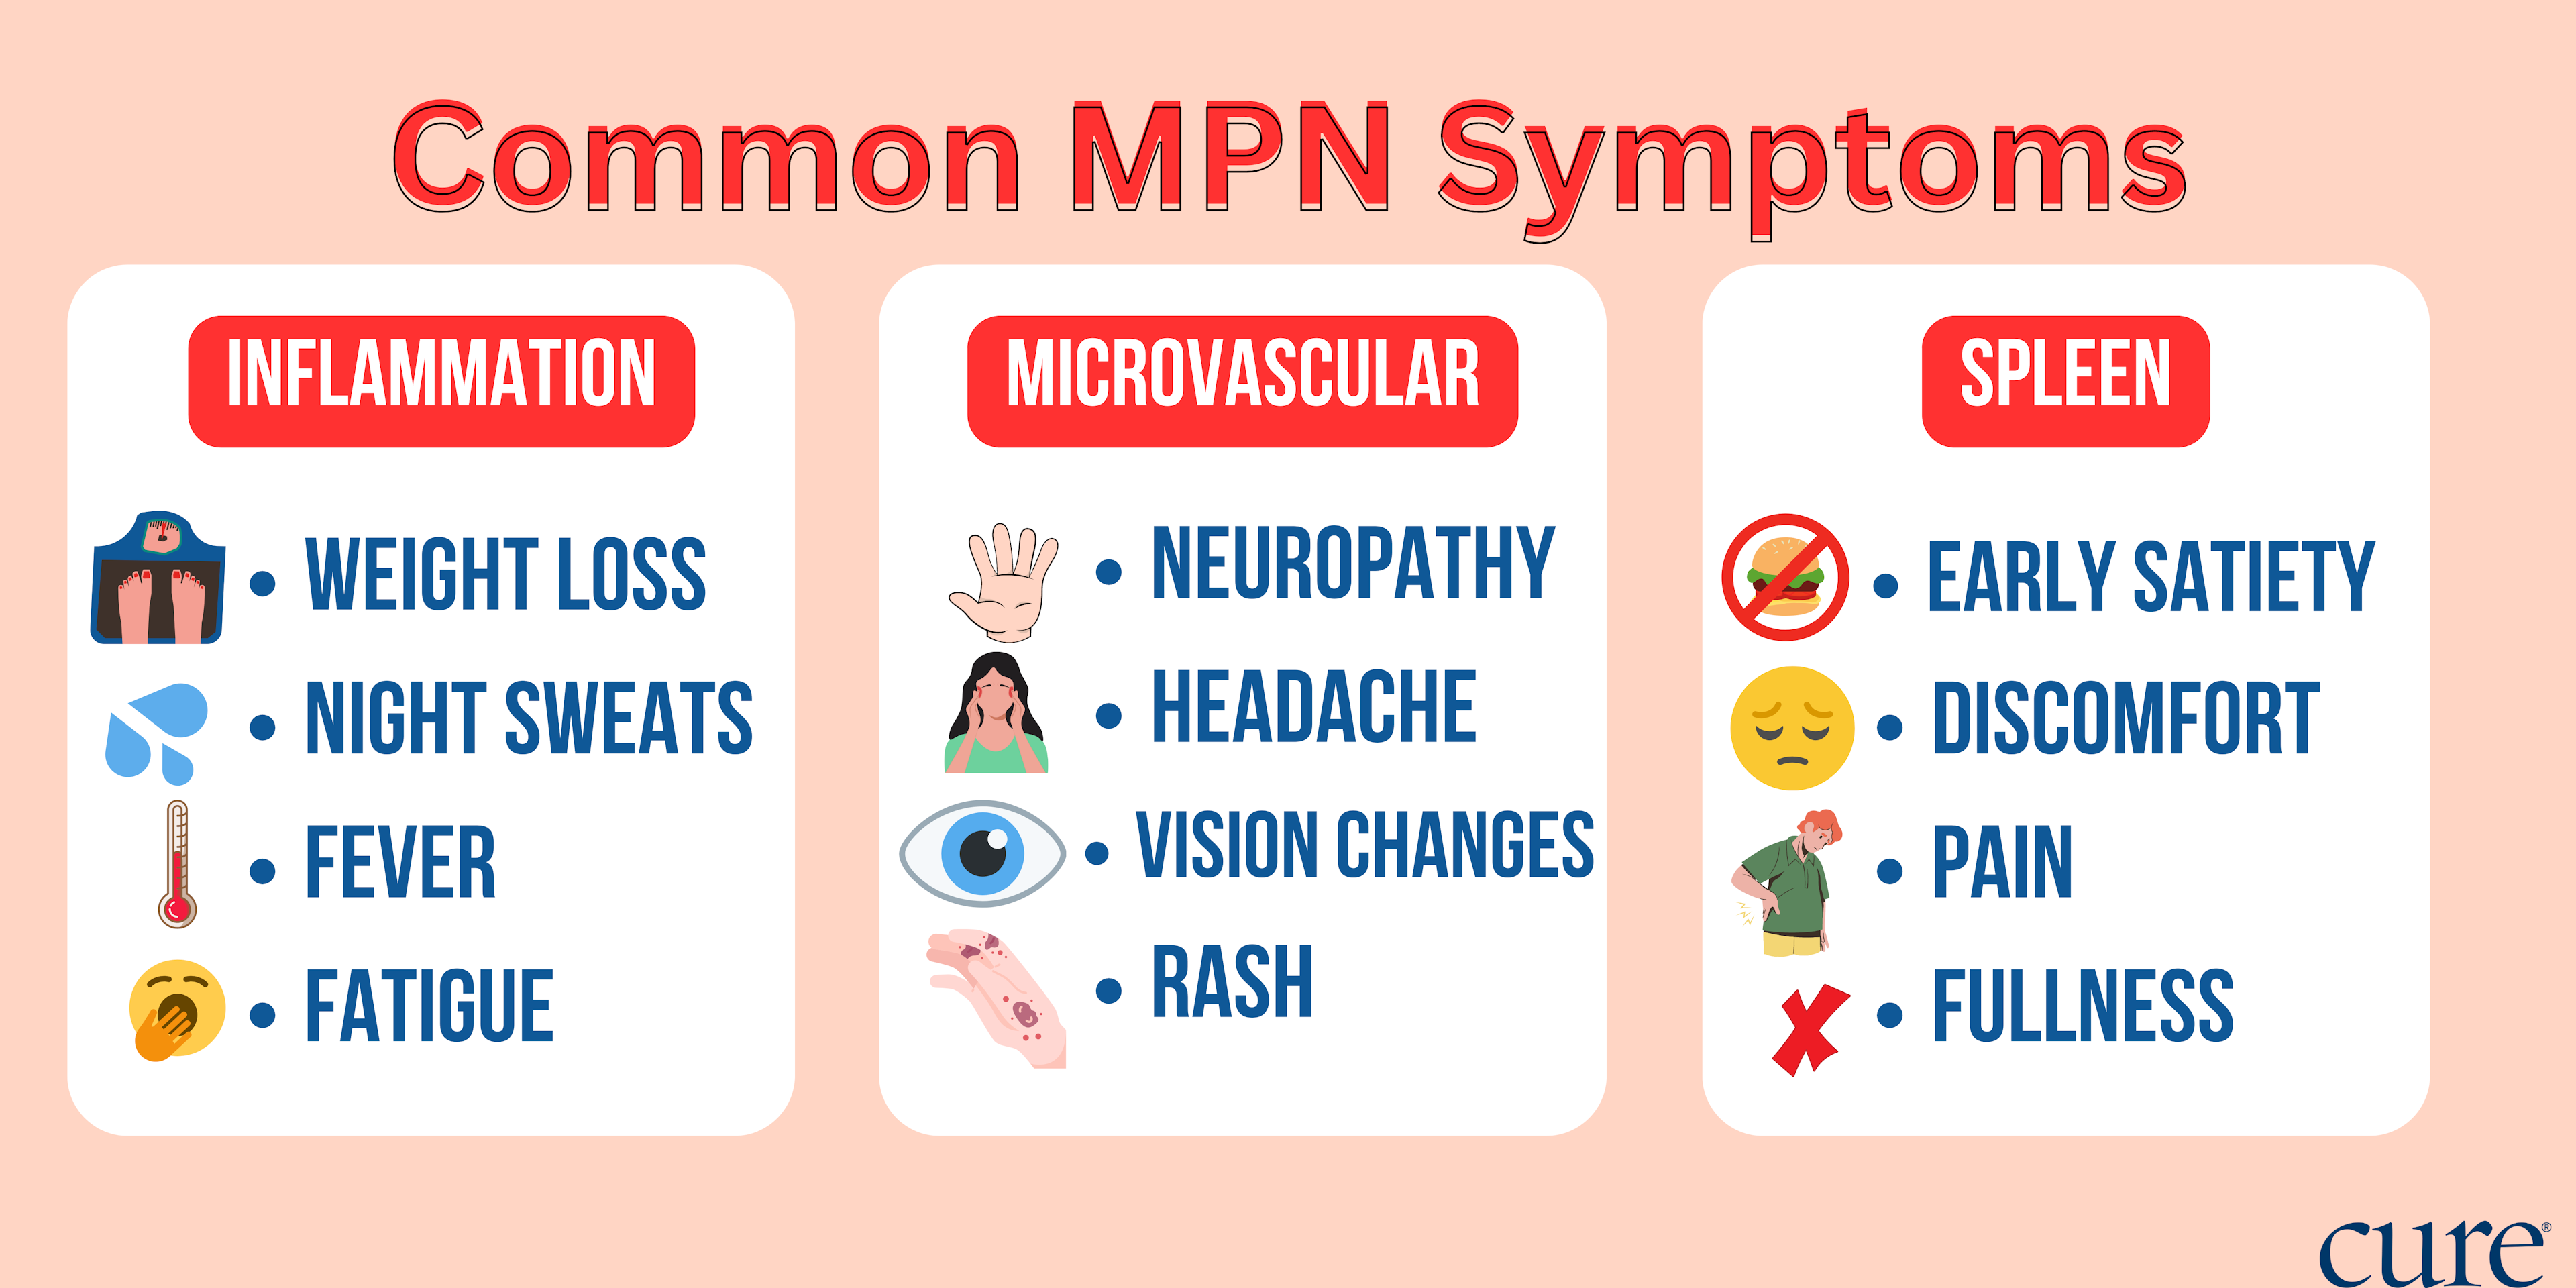 Common symptoms of MPNs may be related to inflammation, the microvasculature and the spleen.